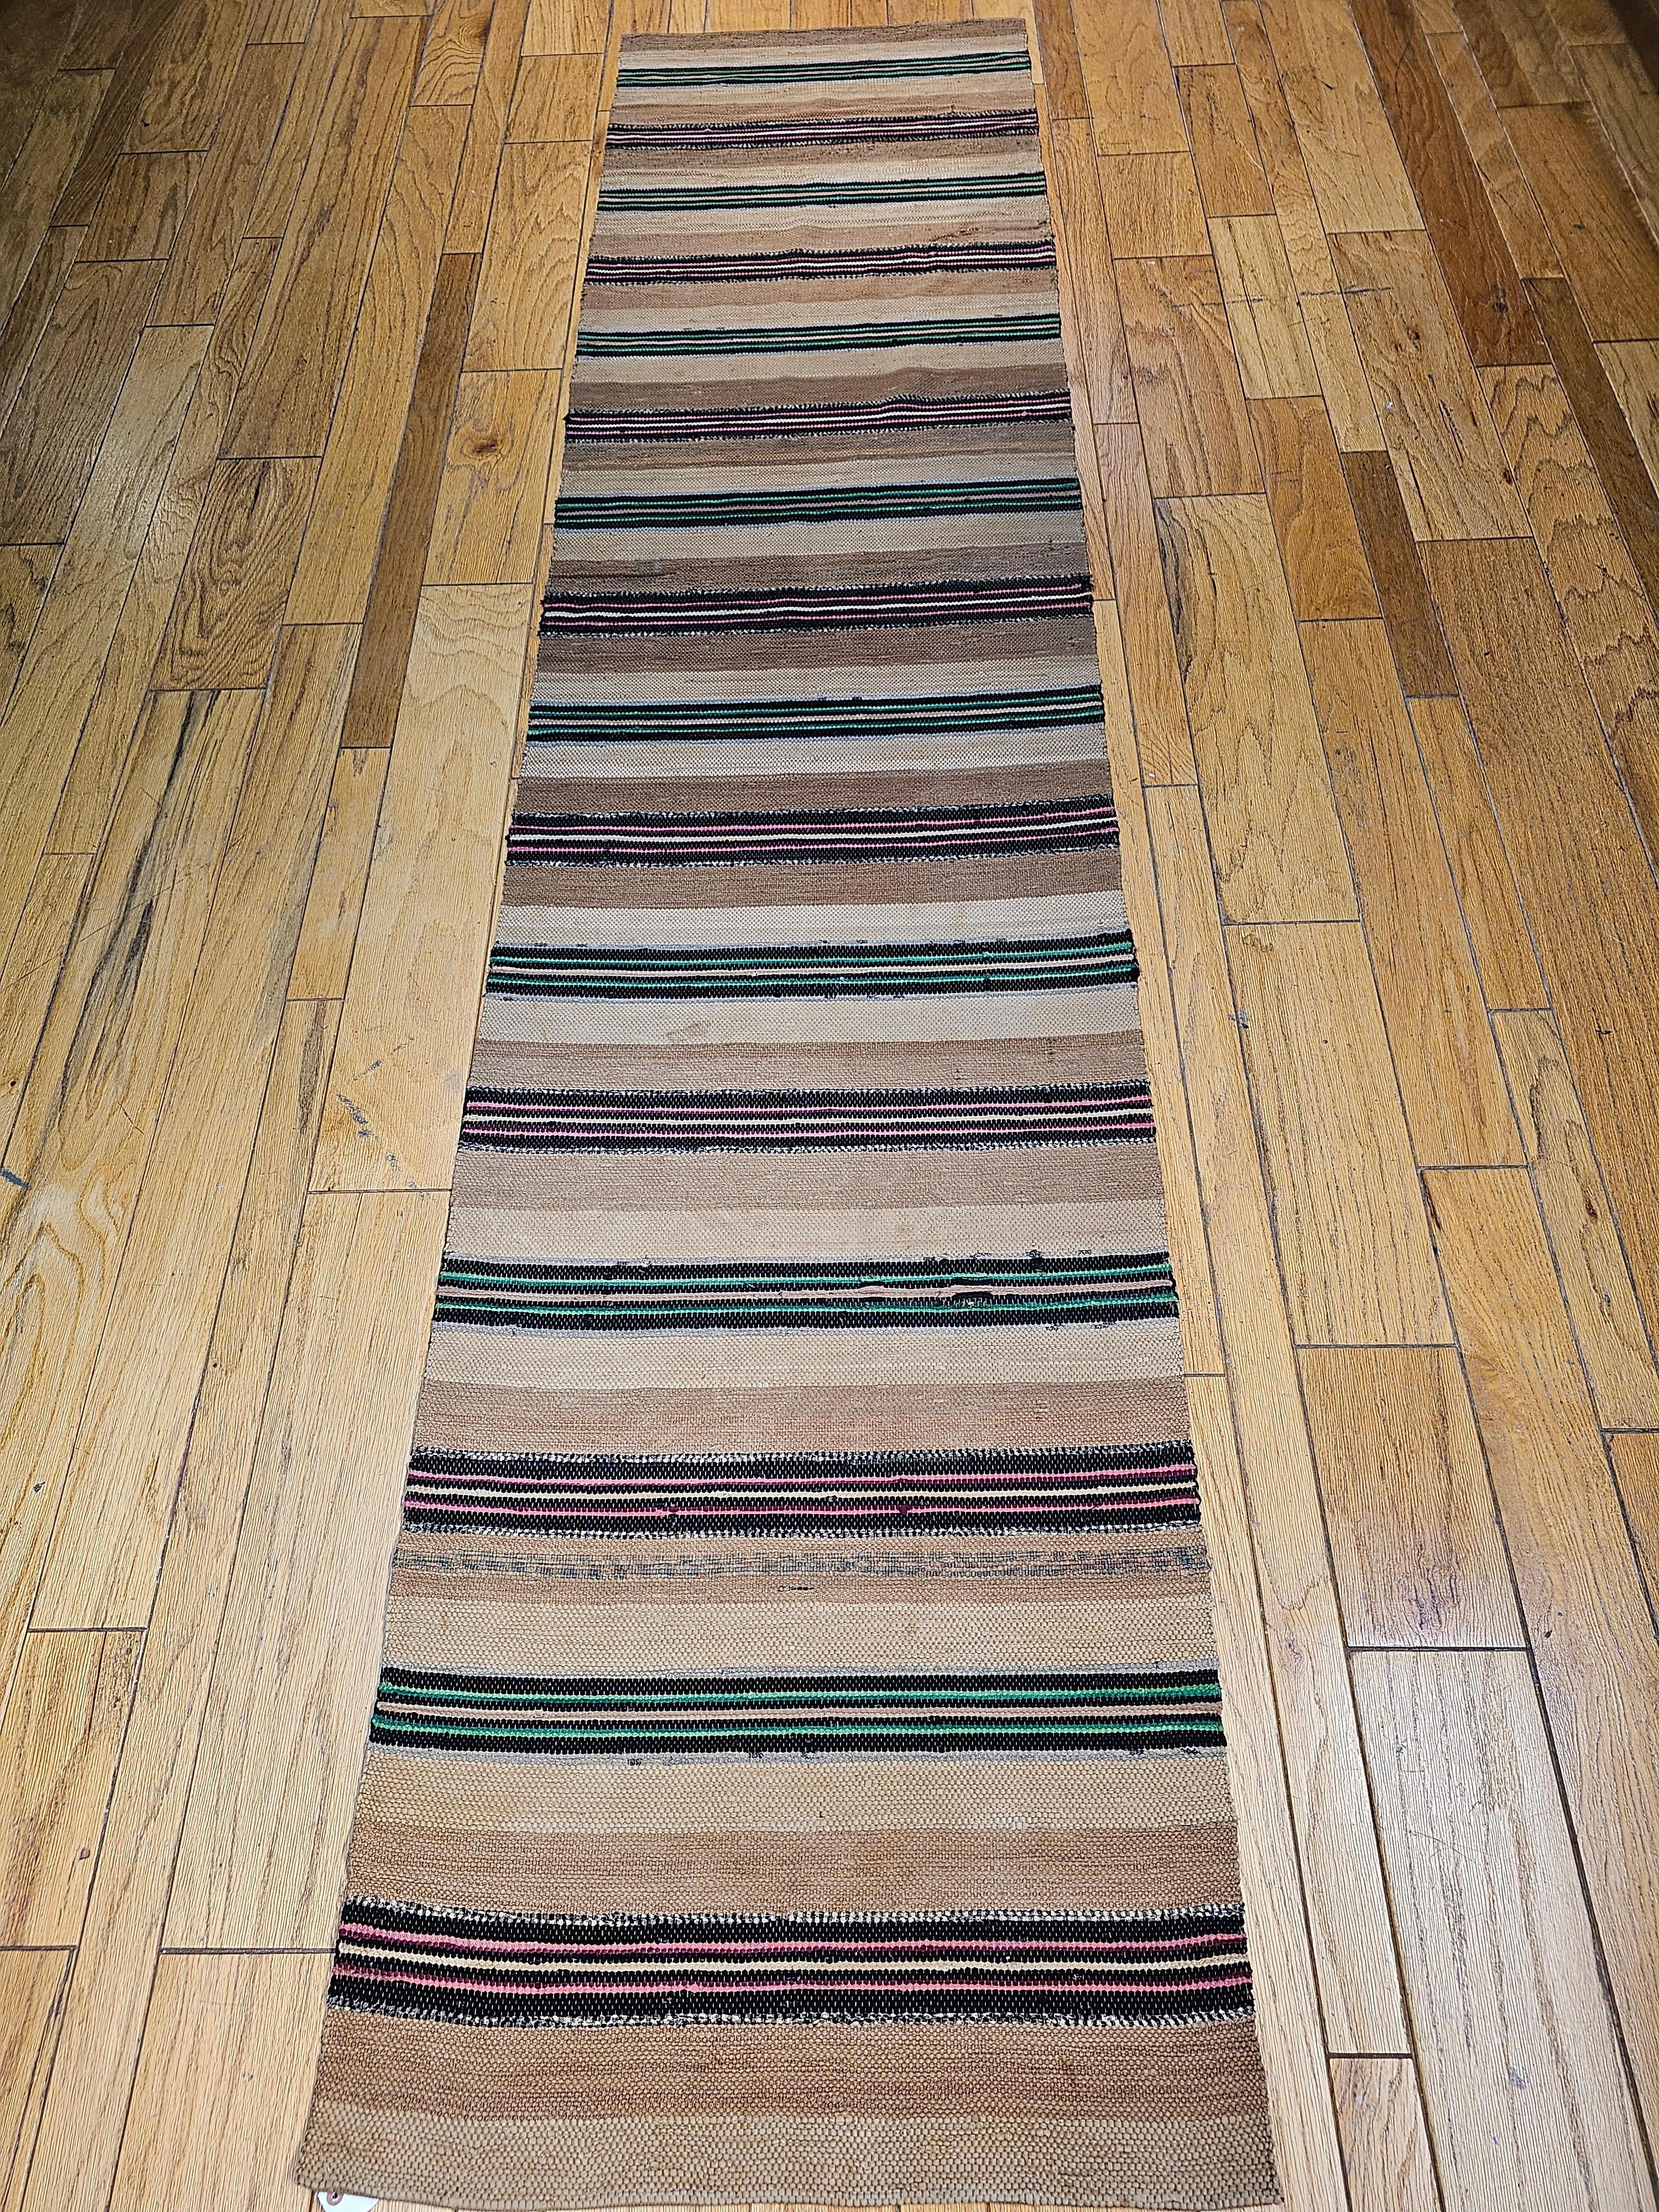 Beautiful vintage American rag runners in a natural earth tone color background of wide bands in tan and cream, separated by bright green and pink color narrow bands. This is one of the two identical runners (SKUs 1612 and 1613). Each runner is 2’